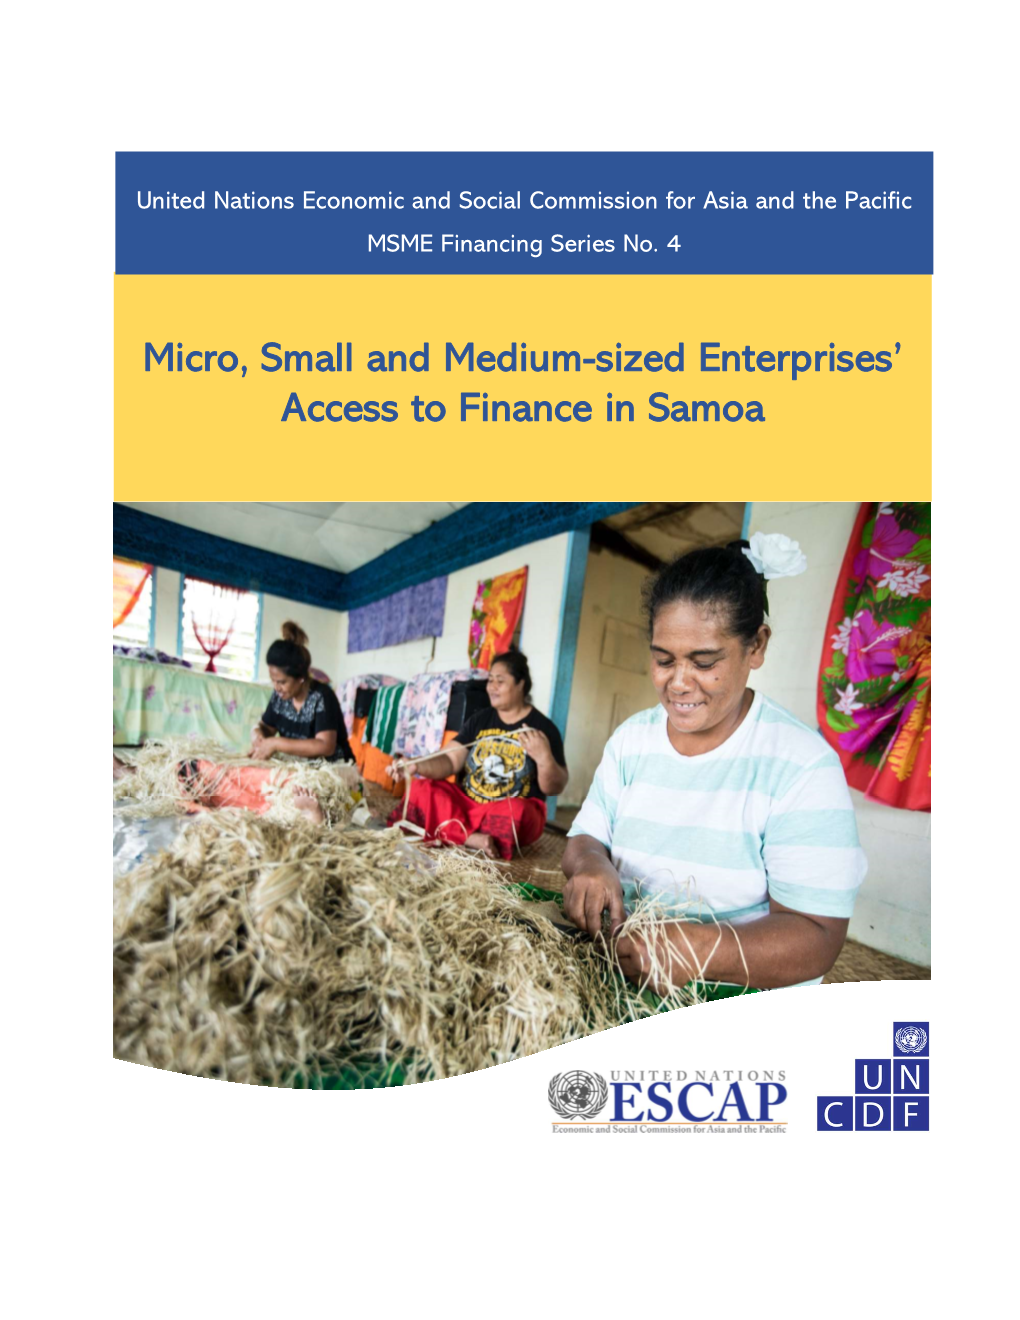 Micro, Small and Medium-Sized Enterprises' Access to Finance In